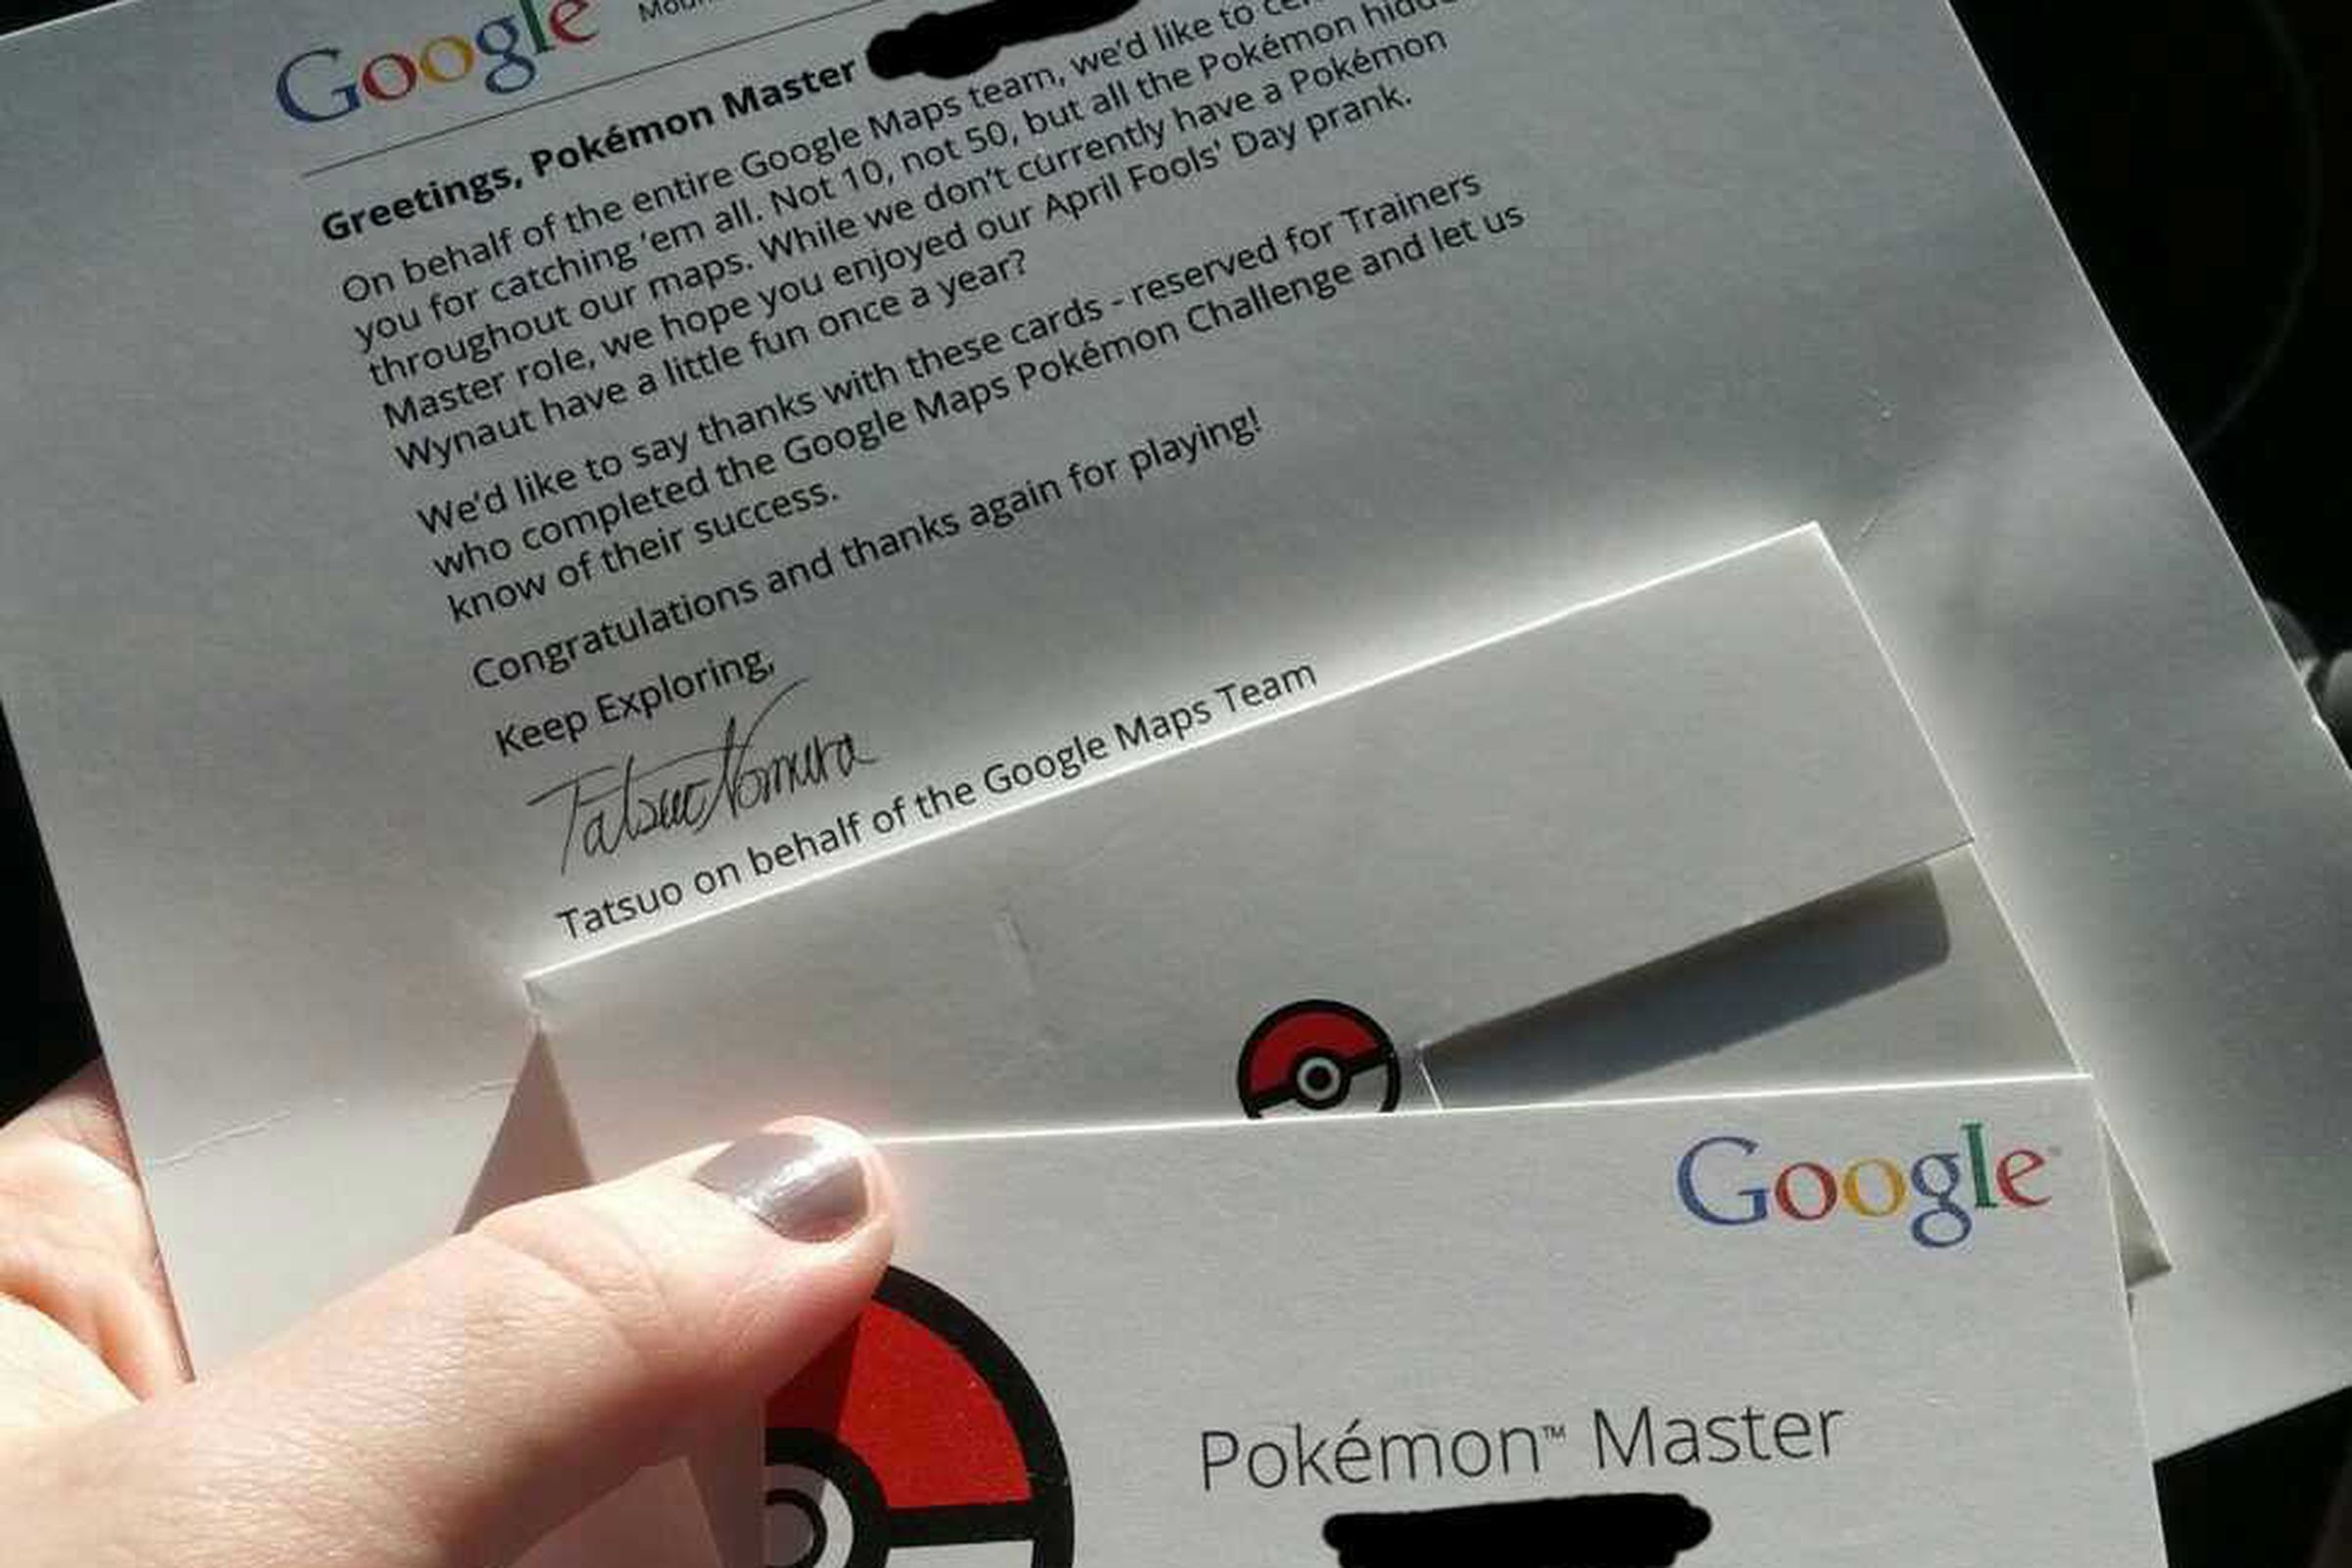 Pokémon Master is probably the easiest job to land at Google The Verge